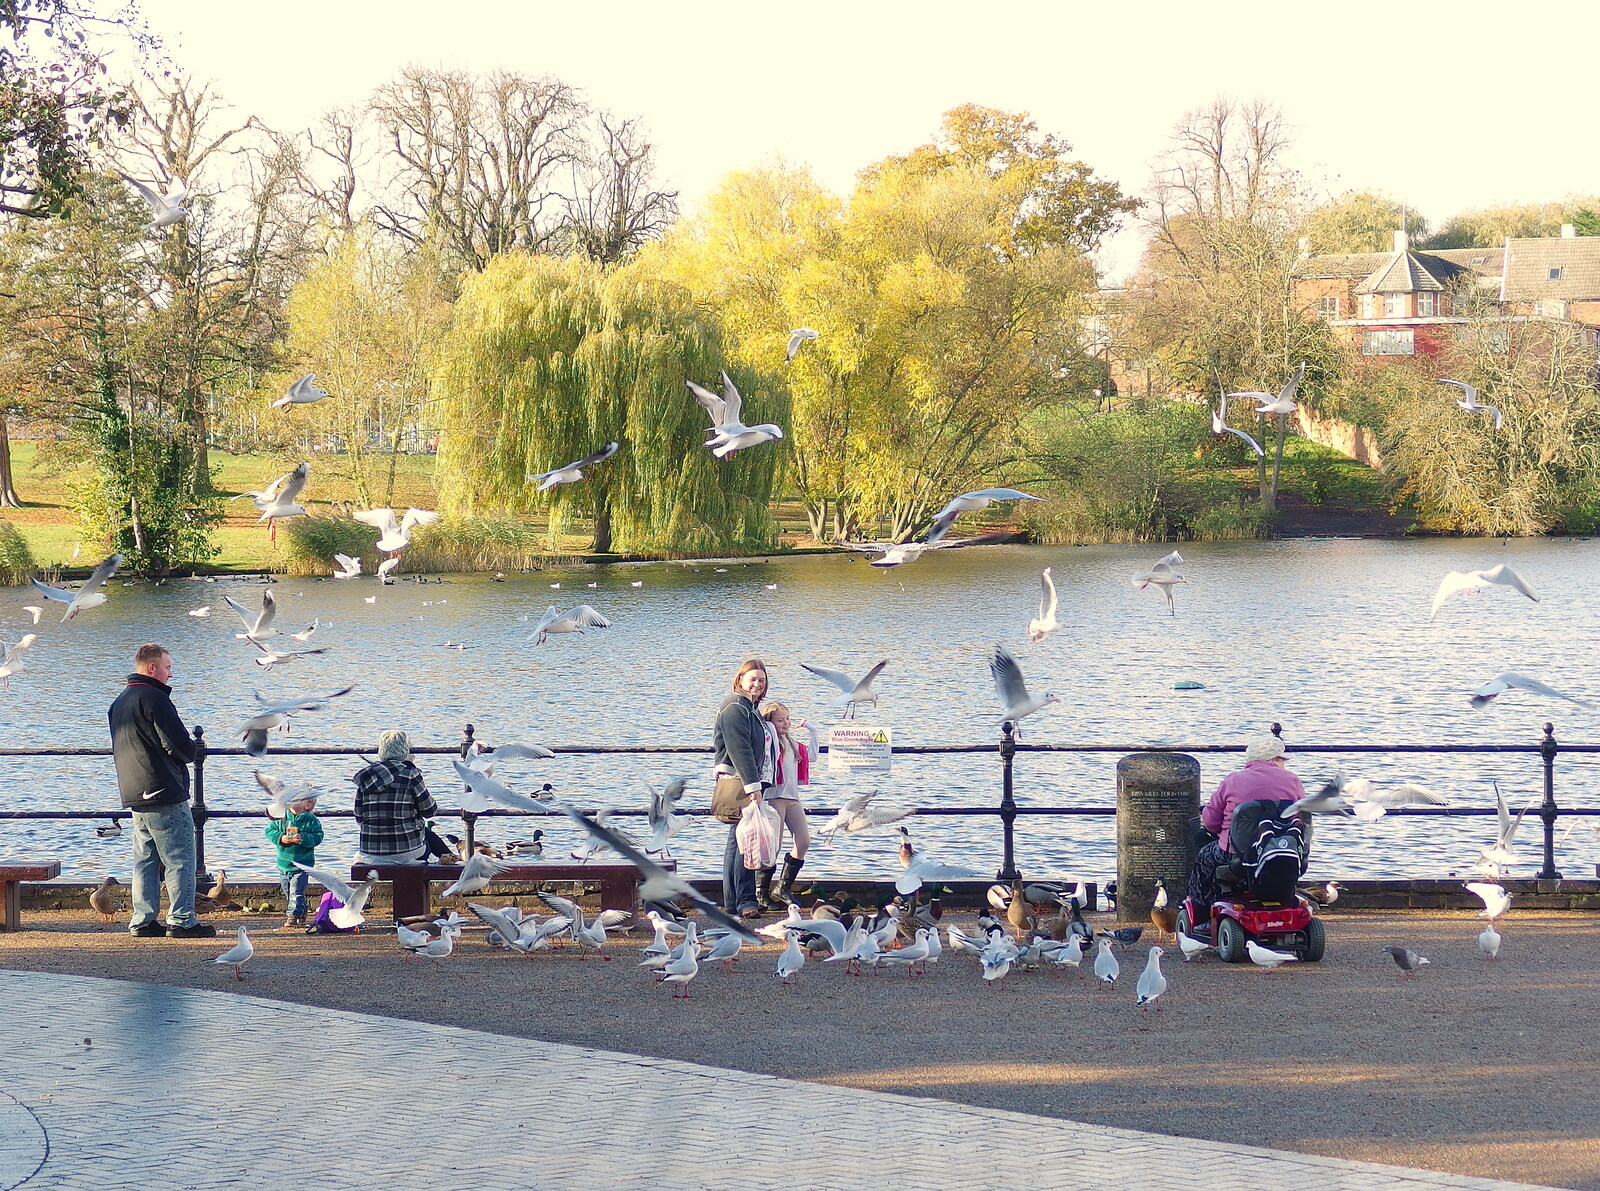 More Building and Palgrave Playground, Suffolk - 24th November 2013: Bird attack on the Mere